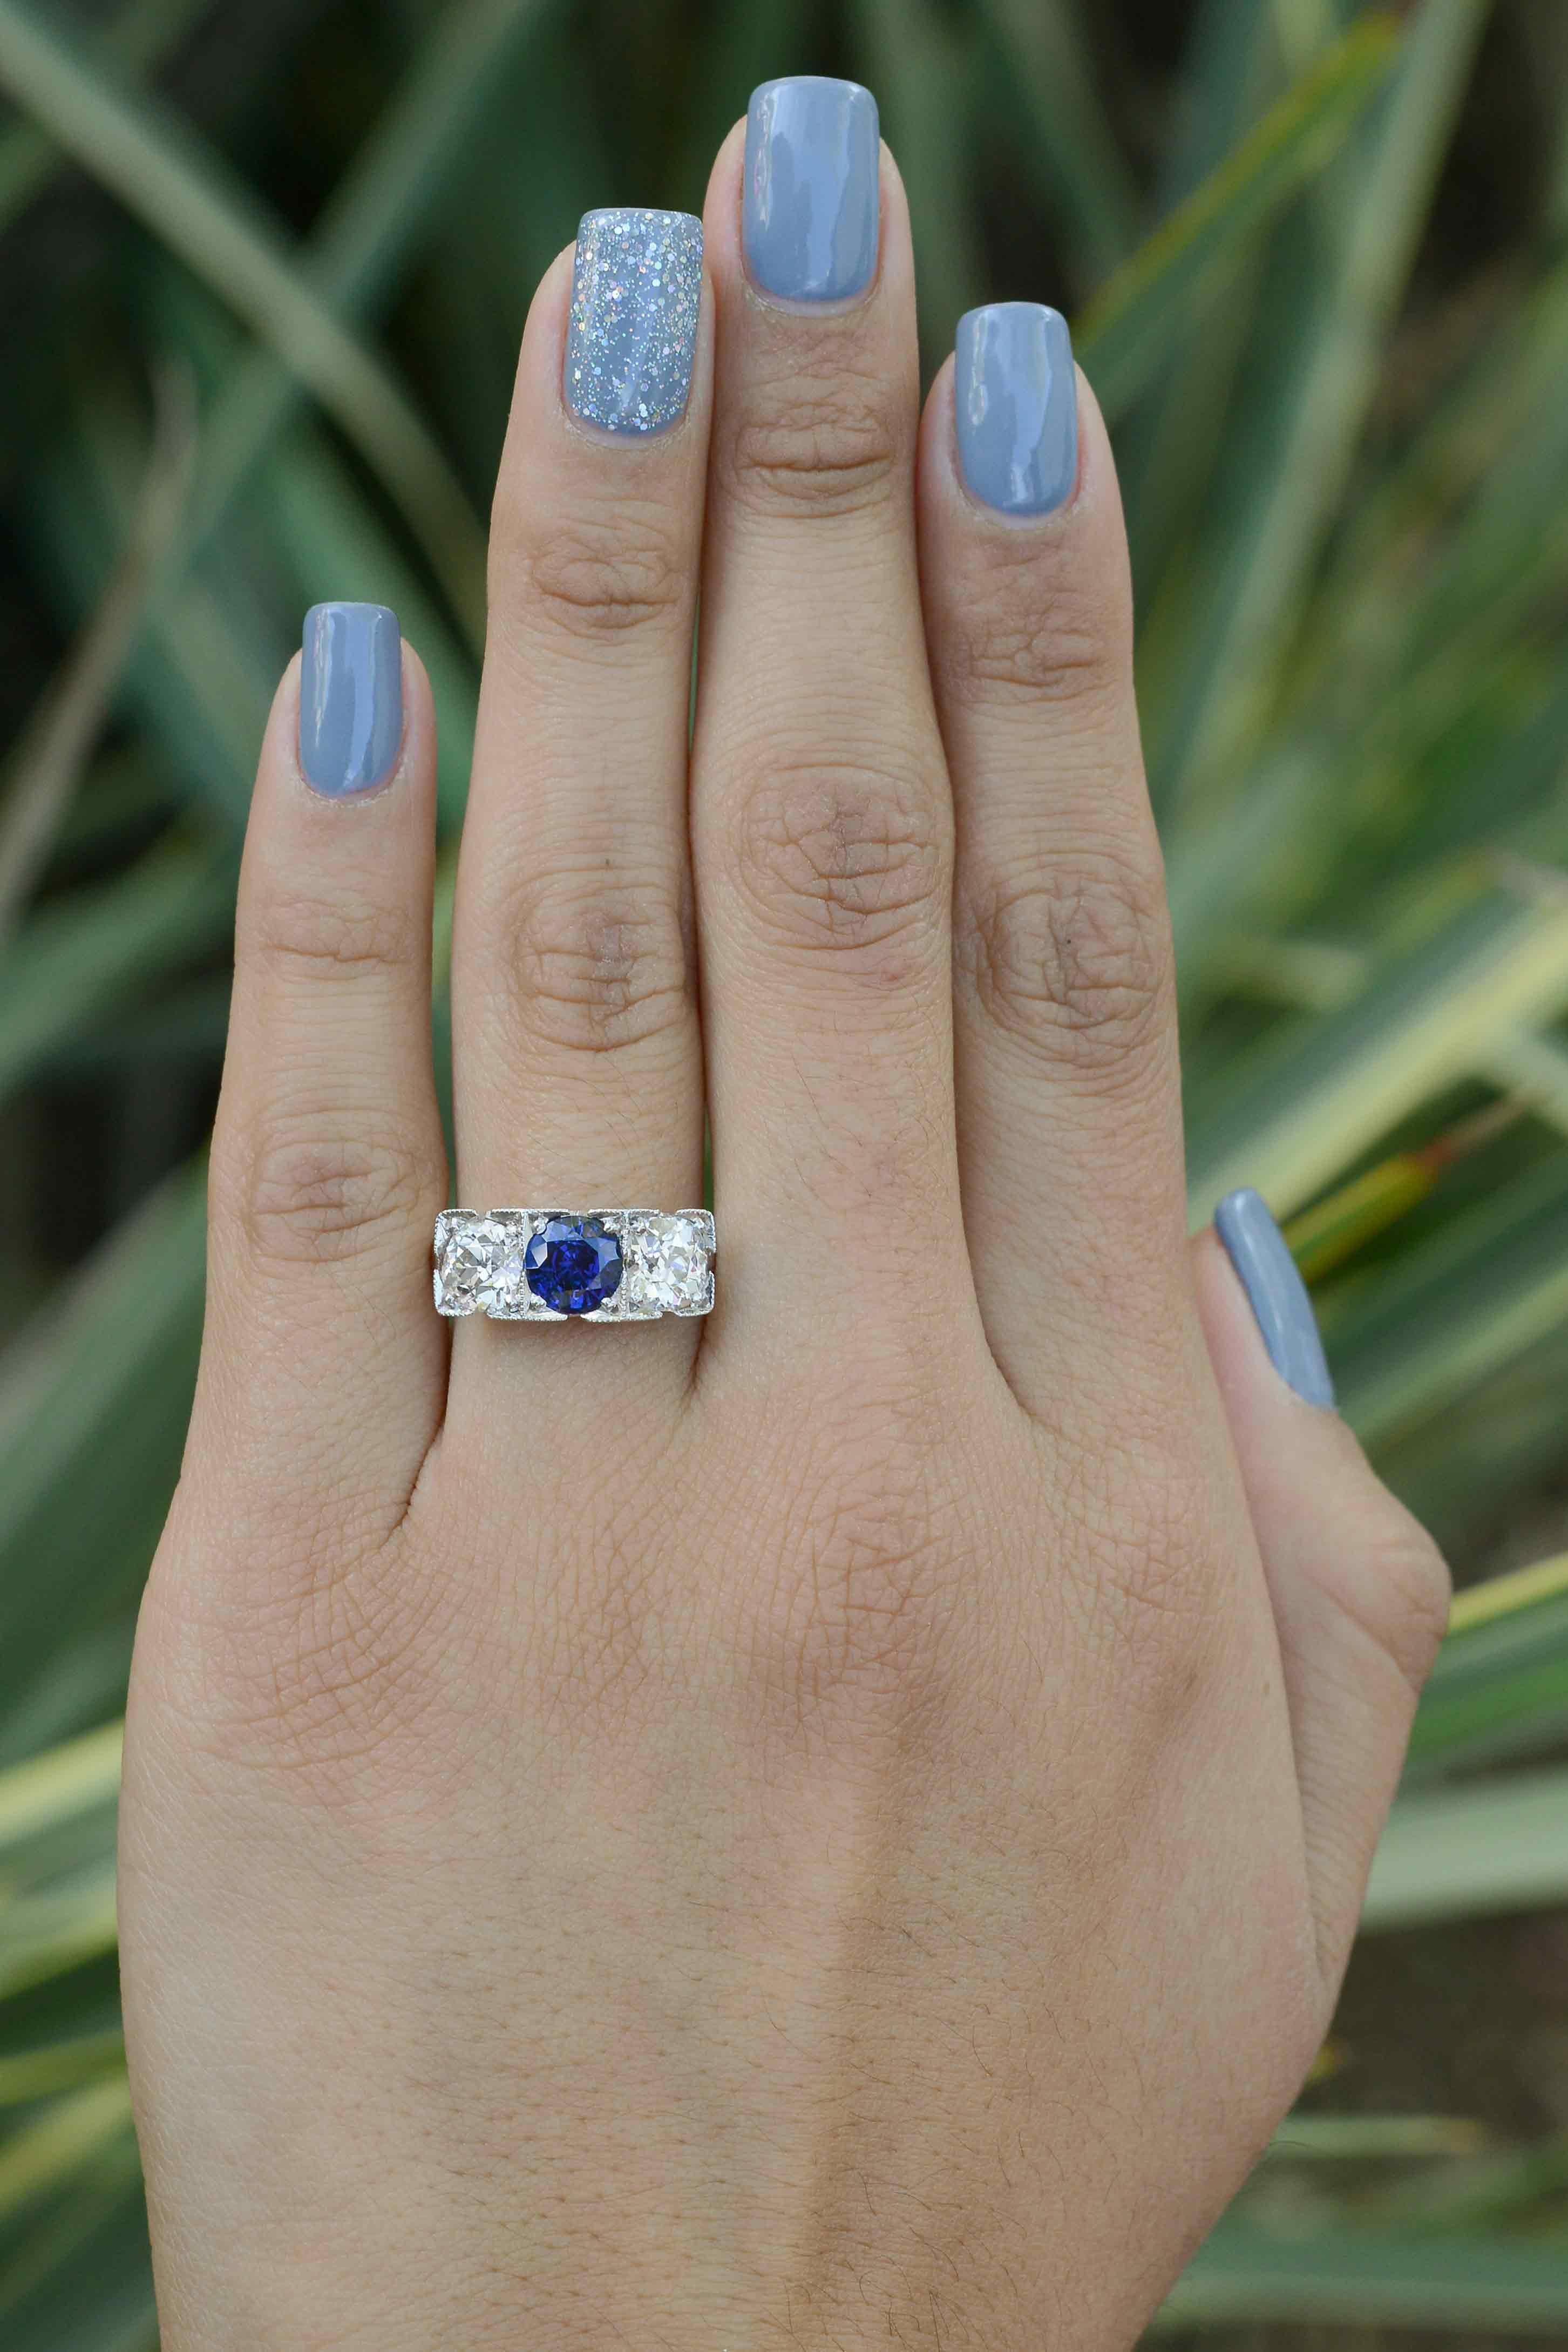 A masterpiece hand engraved antique sapphire and diamond 3 stone engagement ring. The impactful central gemstone is a deeply saturated, lustrous, royal blue sapphire that you can't help being entranced by. Flanked by a significant, matched pair of